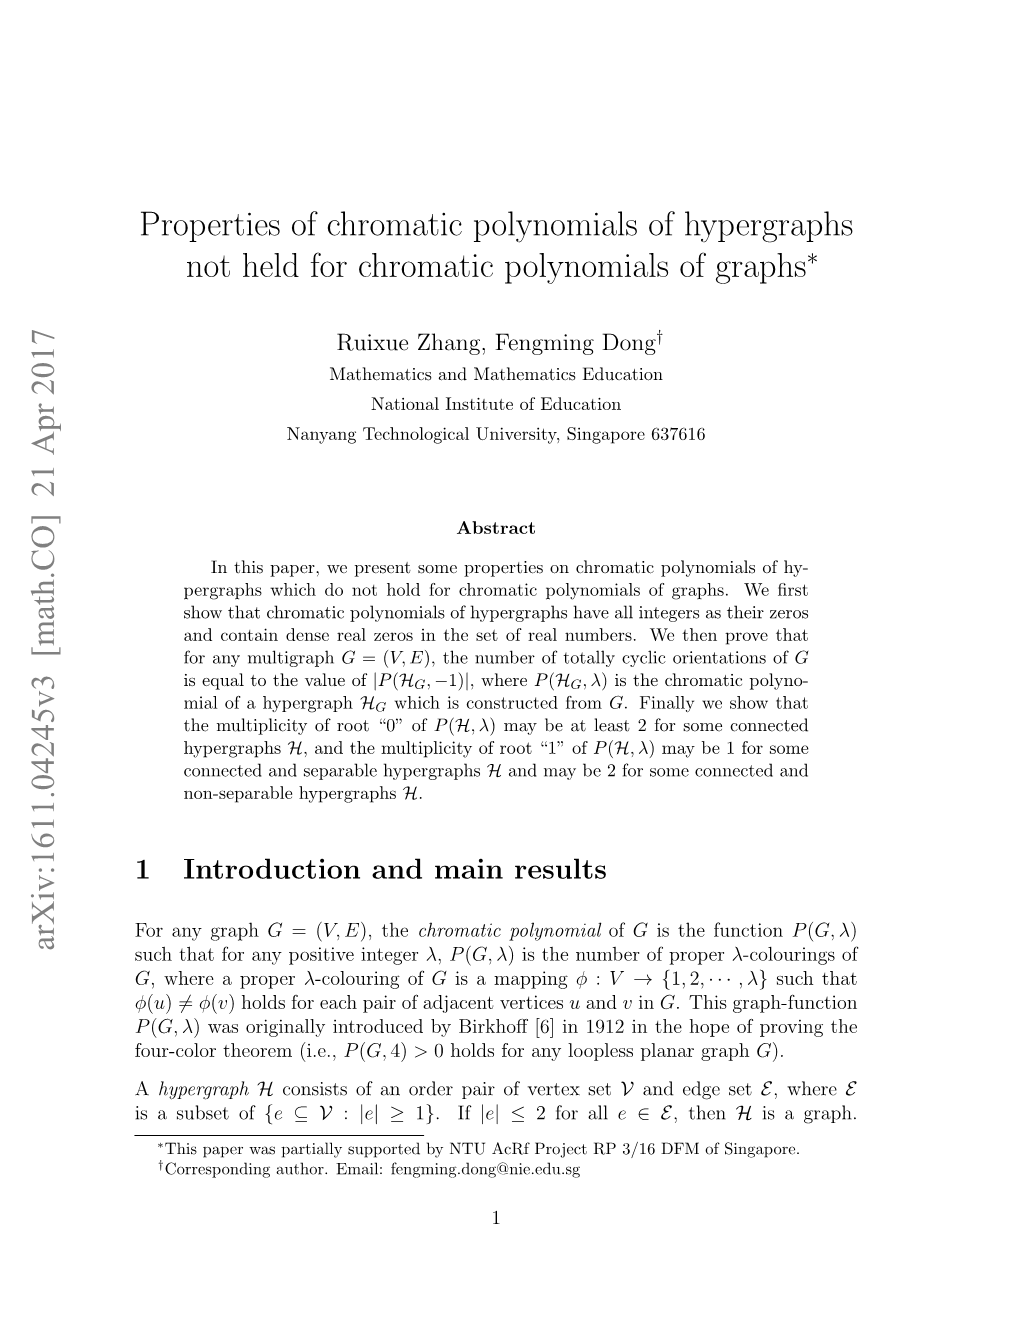 Properties of Chromatic Polynomials of Hypergraphs Not Held for Chromatic Polynomials of Graphs∗